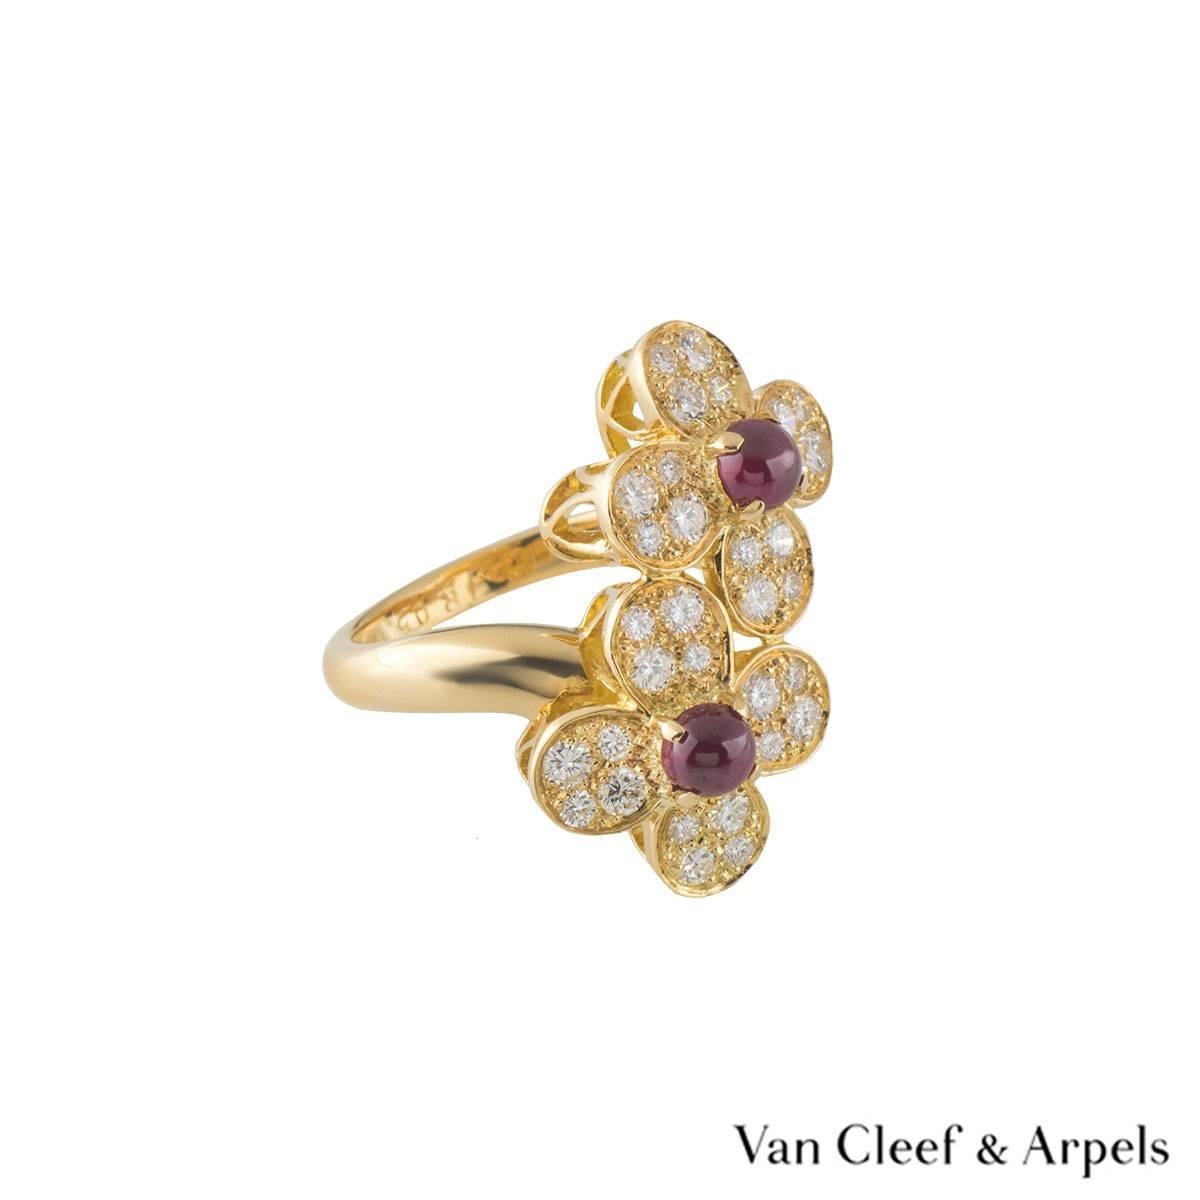 A beautiful 18k yellow gold Van Cleef & Arpels diamond and ruby ring from the Vintage Alhambra collection. The ring comprises of a double 4 petal flower motifs with a cabochon cut ruby in the centre of each. Complementing this motif are 4 round